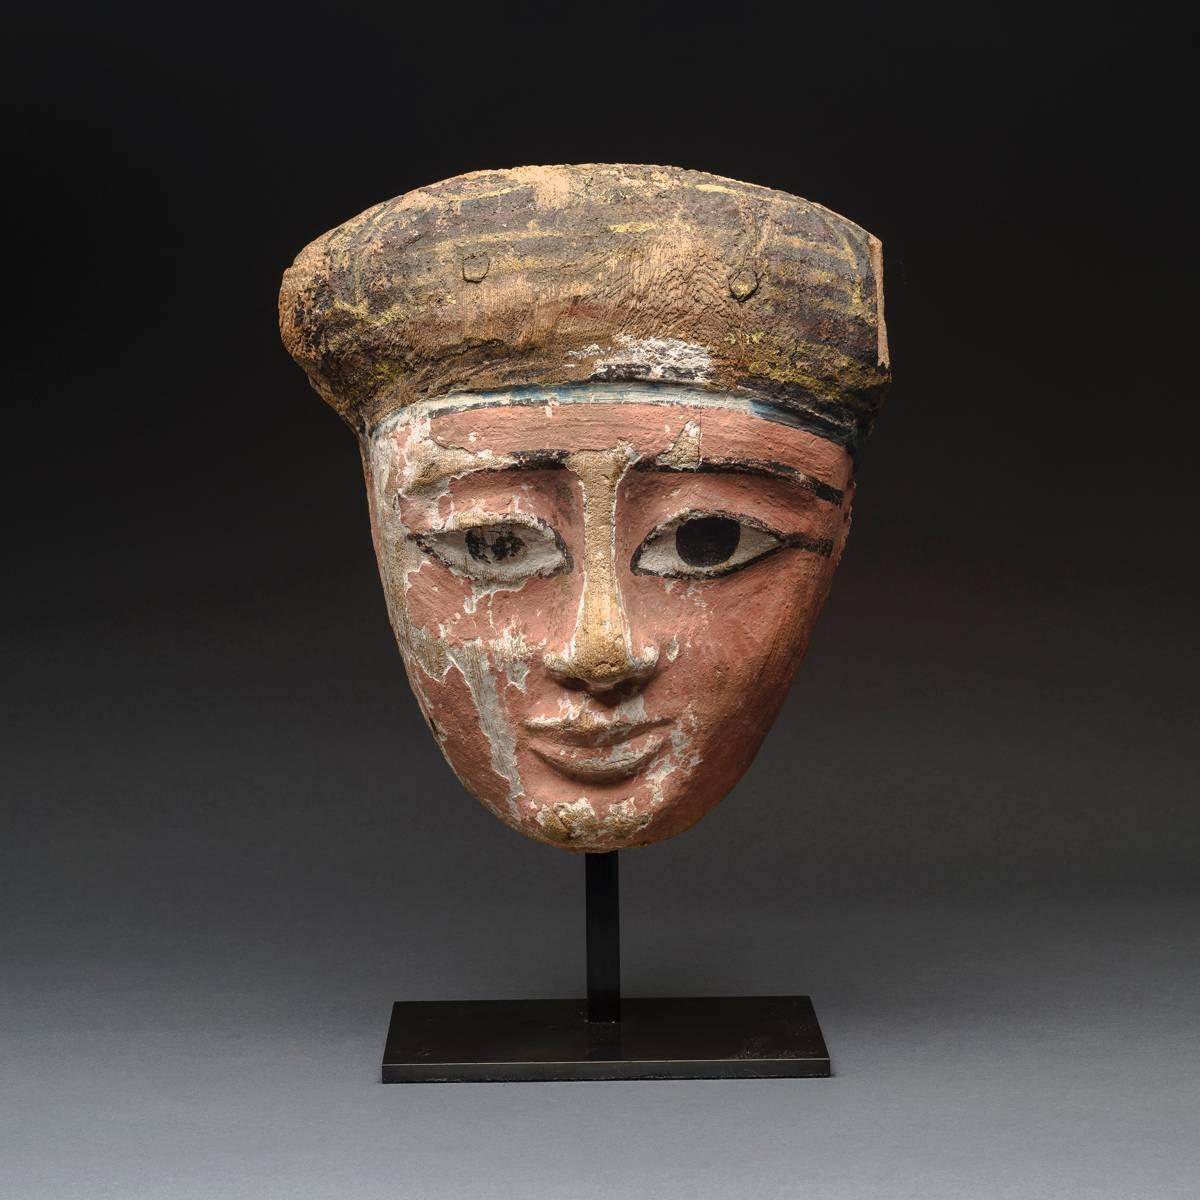 In ancient Egypt, masks were primarily used for funerary purposes as death masks. Ancient Egyptians believed that it was extremely important to preserve the body of a dead person because the soul must have a place where to dwell upon death.